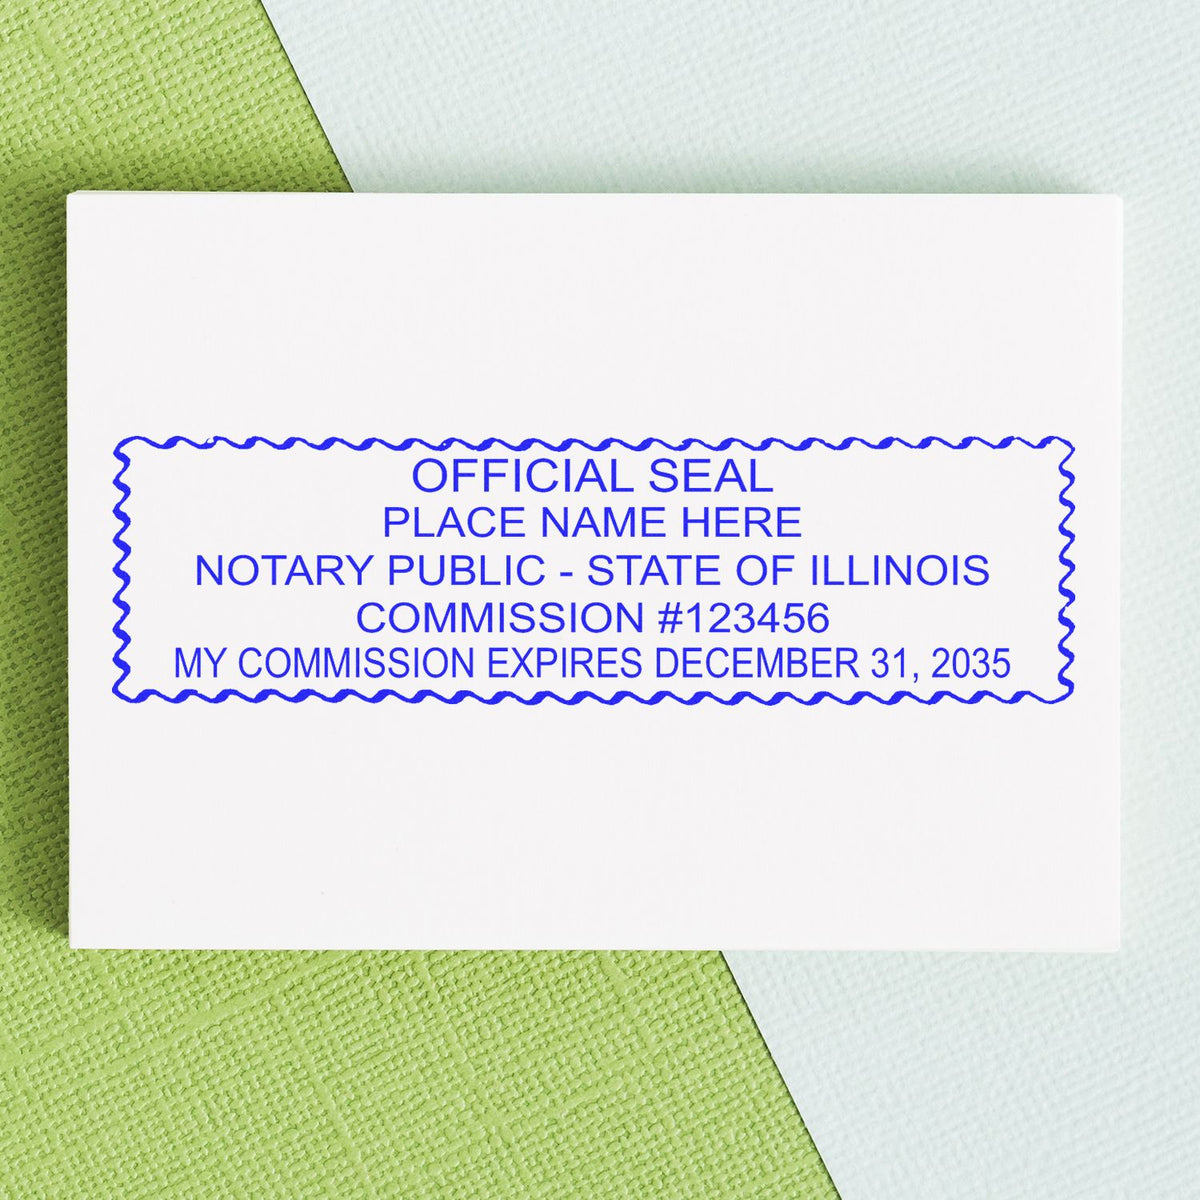 An alternative view of the PSI Illinois Notary Stamp stamped on a sheet of paper showing the image in use